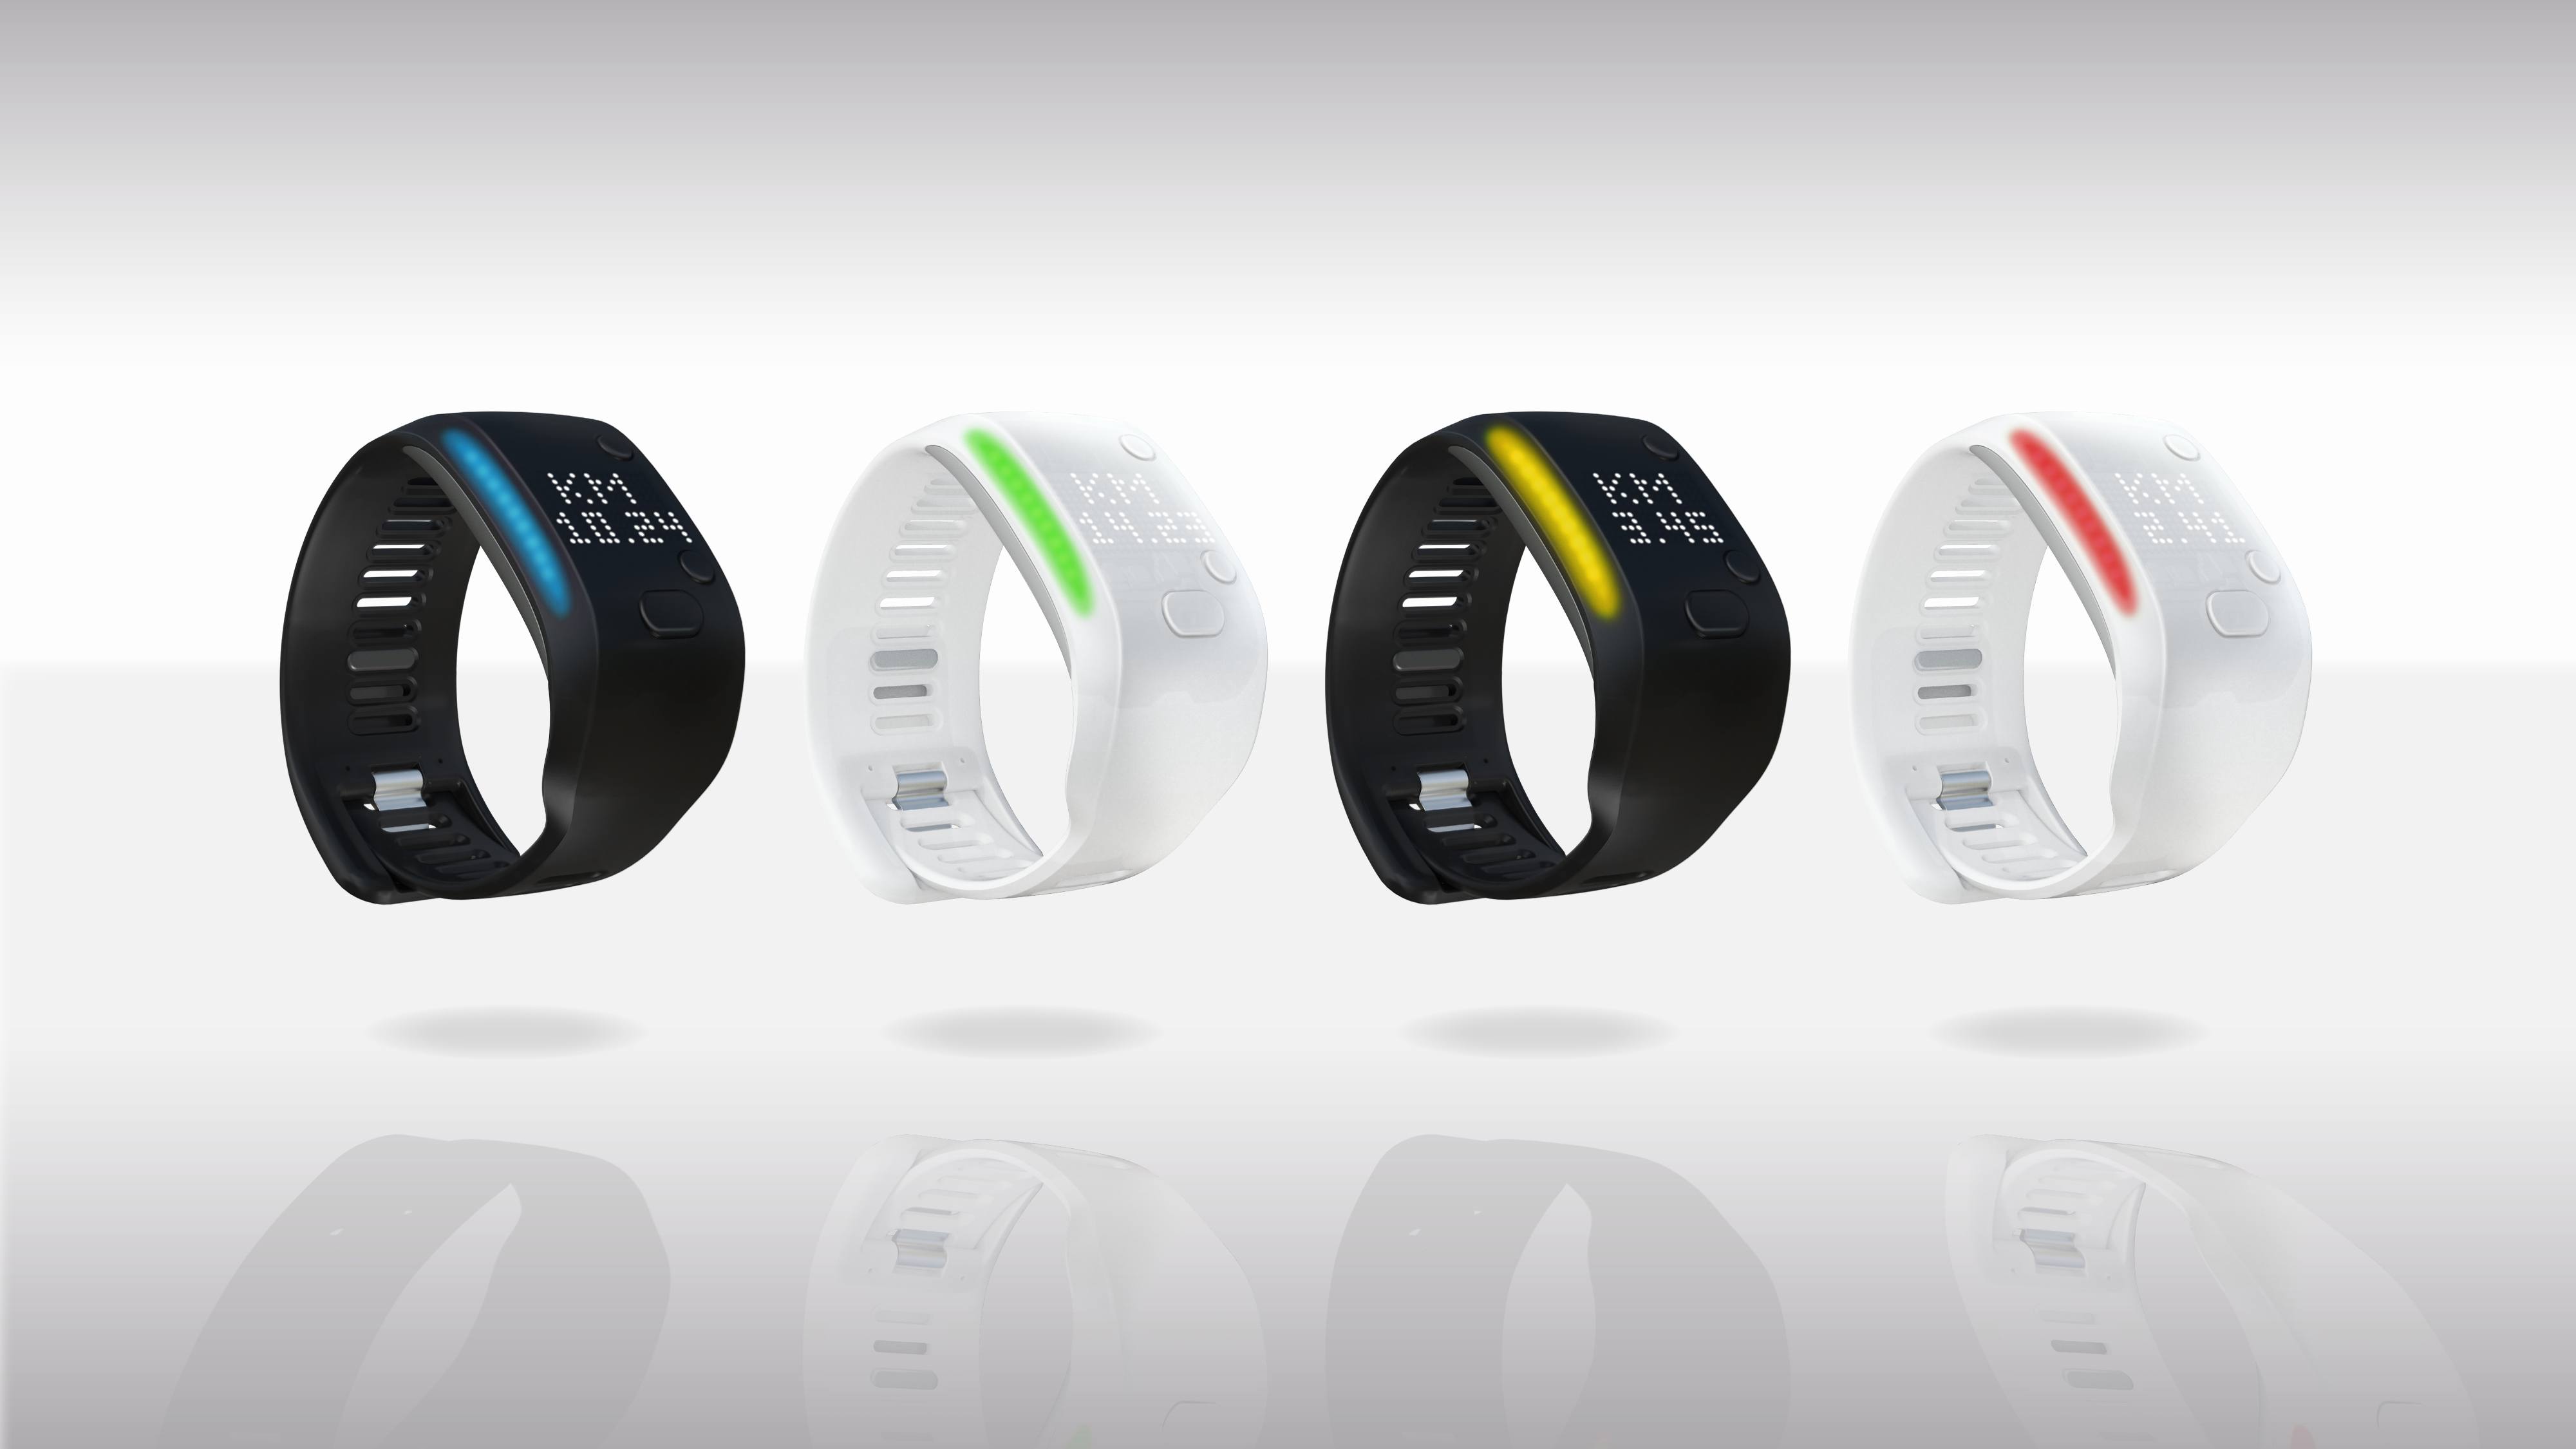 Adidas announces $199 ‘Fit Smart’ fitness tracker that syncs w/ miCoach